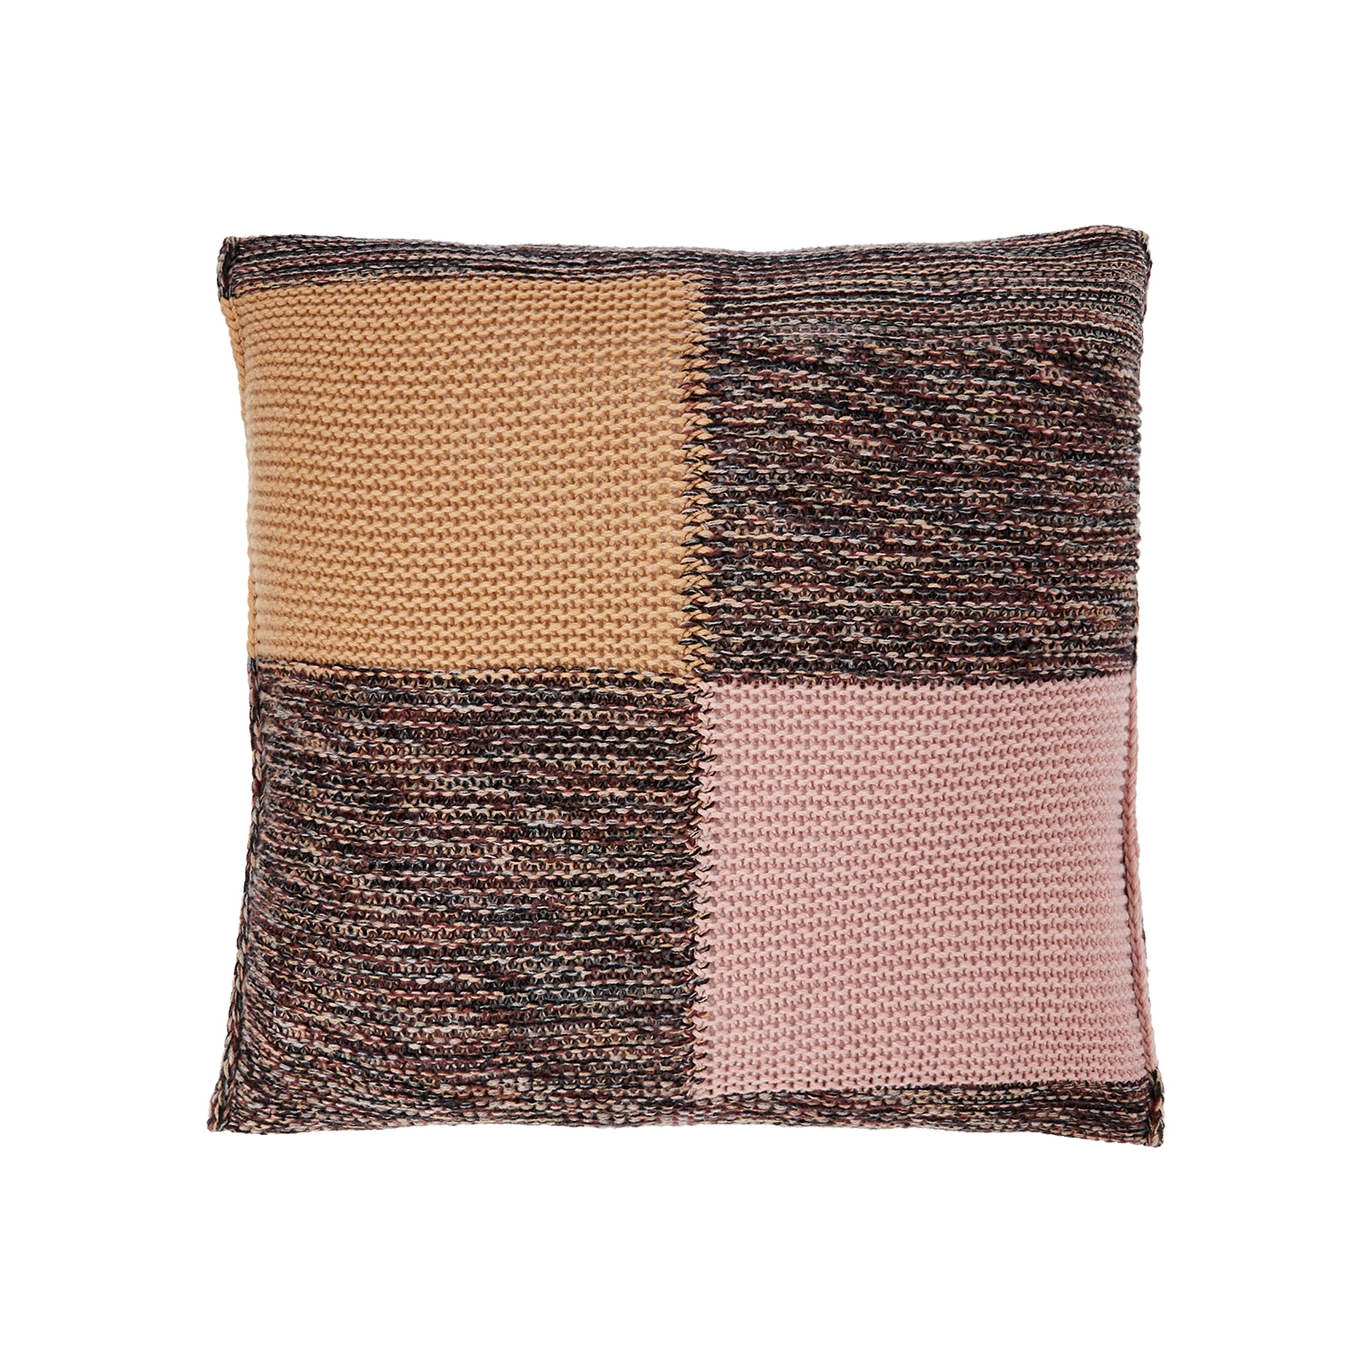 Inverni Patchwork-knit Cashmere Square Pillow - Brown - One Size